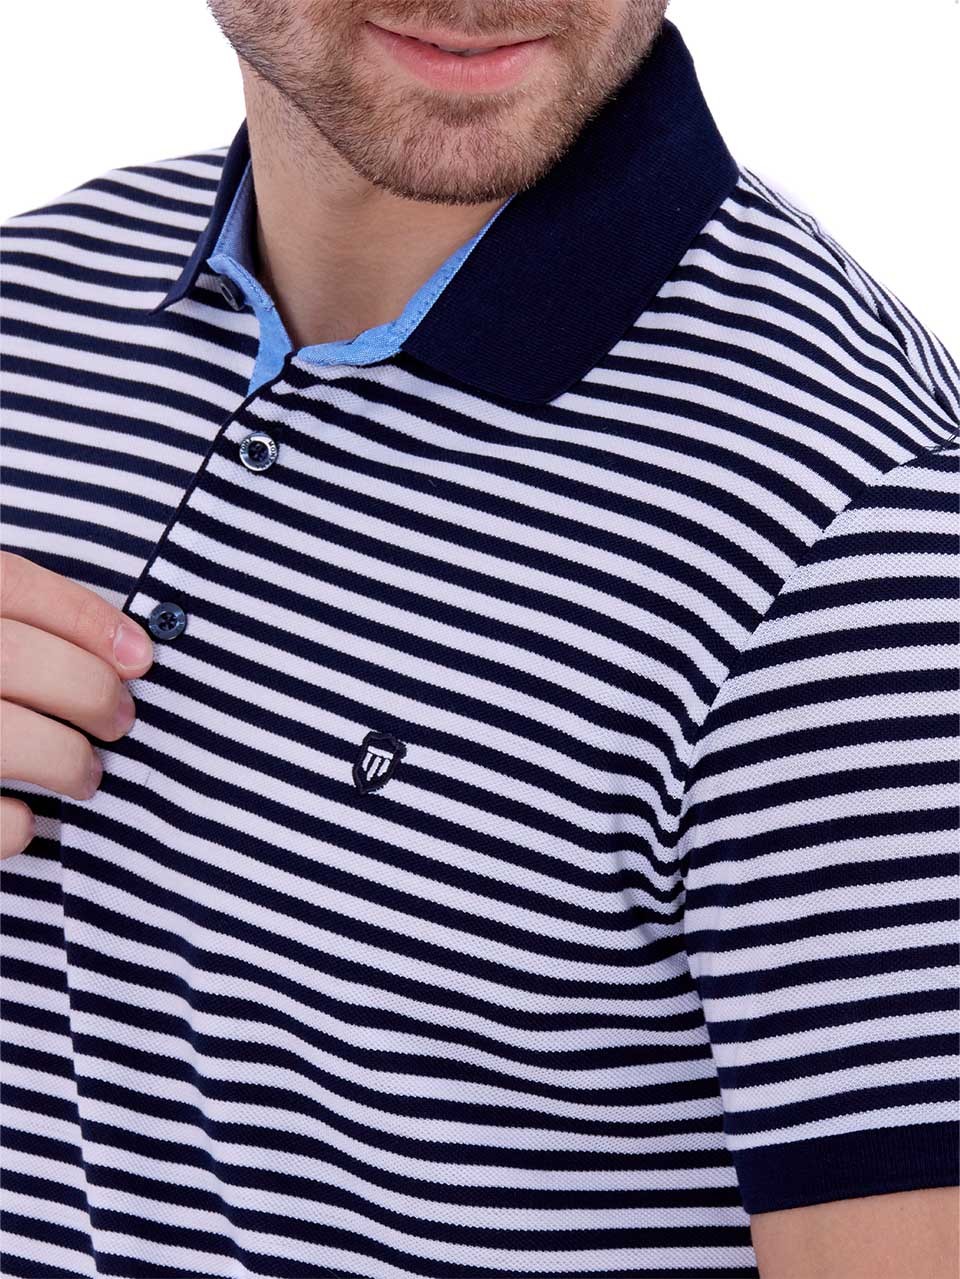 Black Striped White Shirt with polo collar 